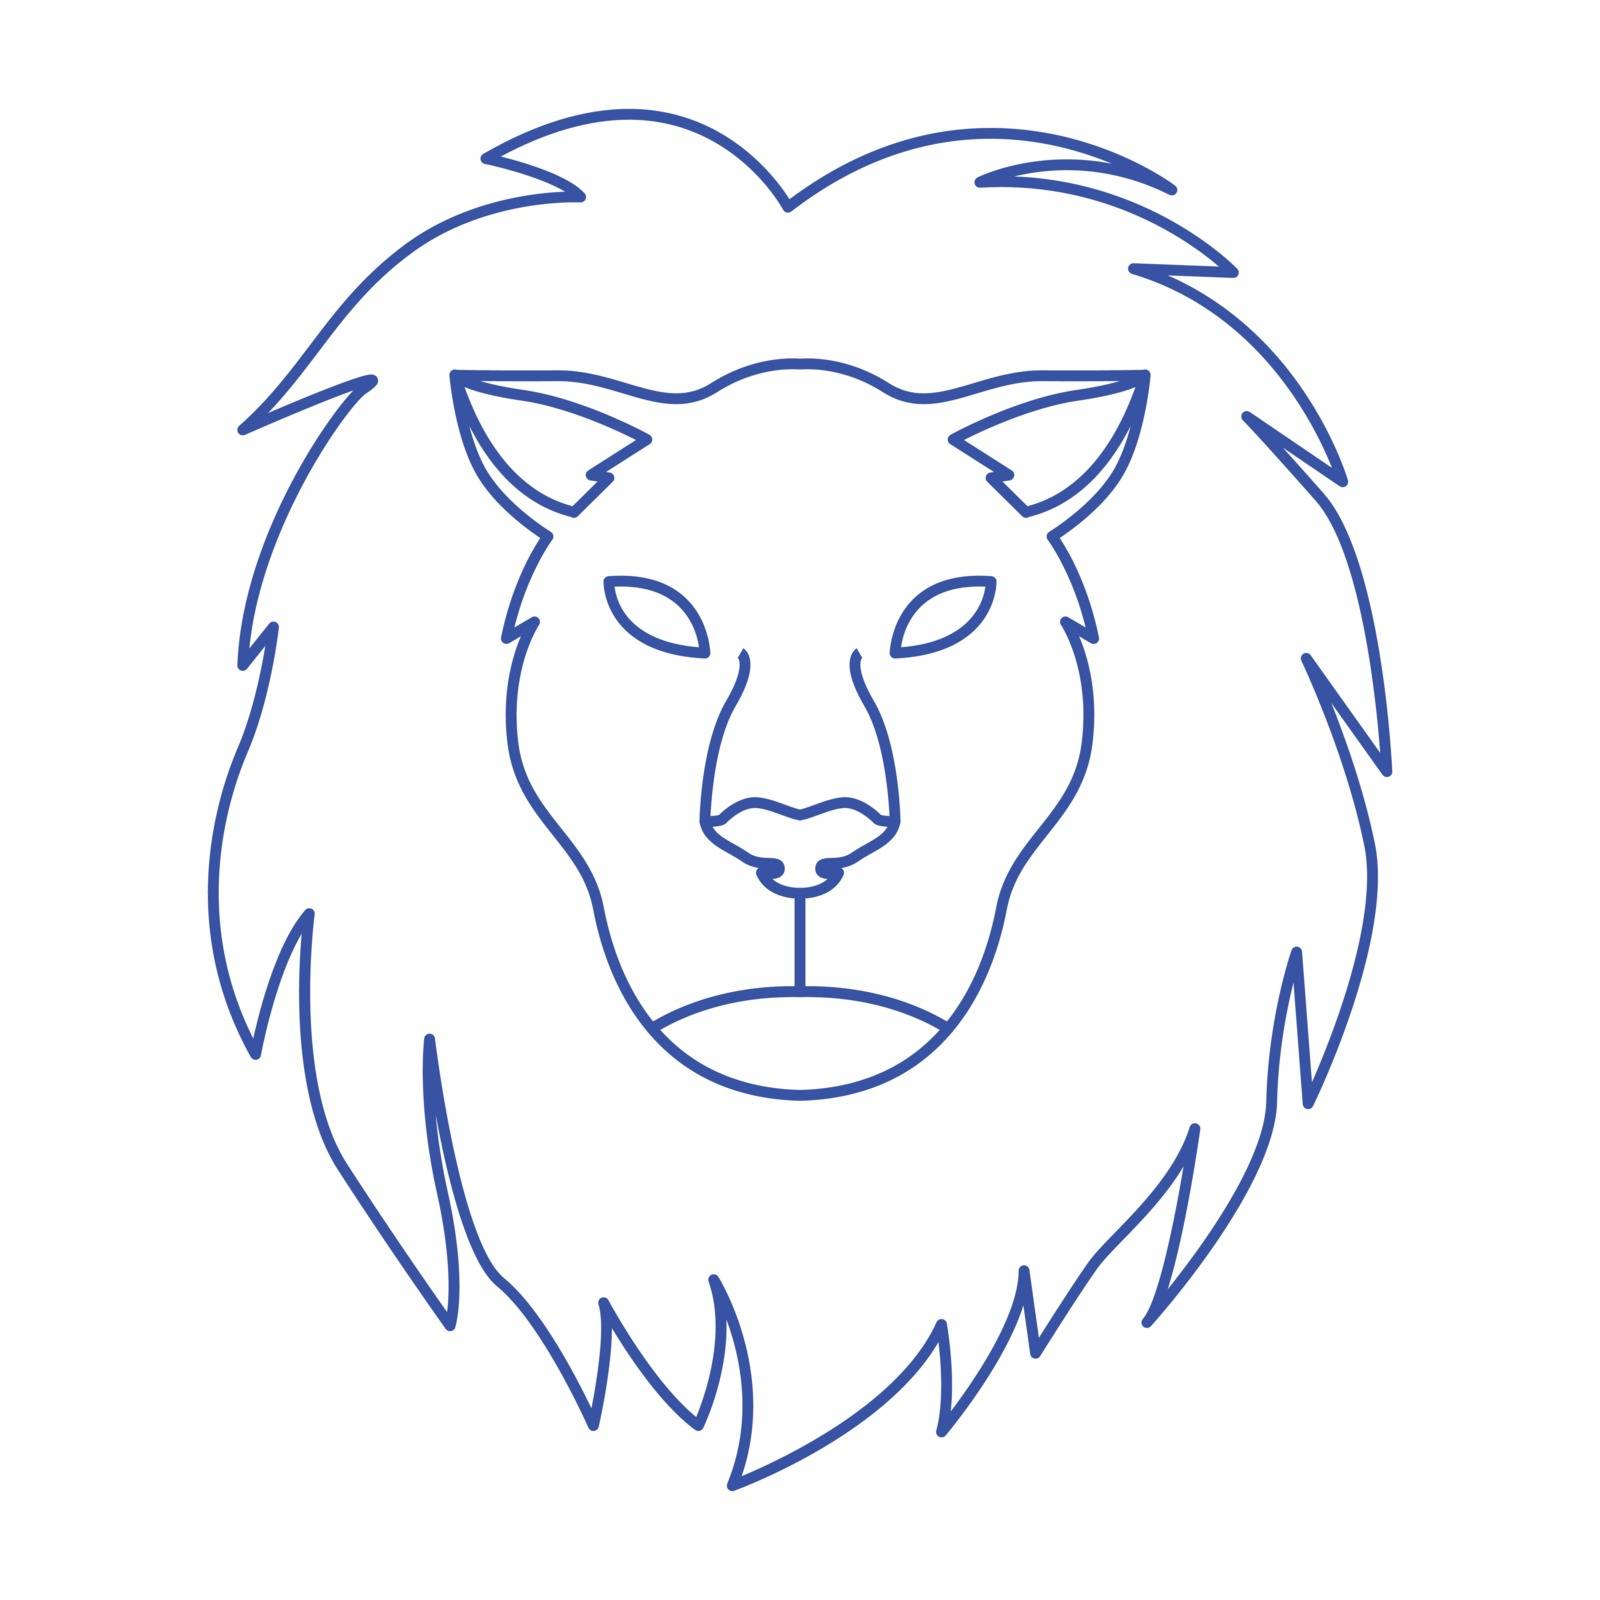 Thin line leo icon by ang_bay